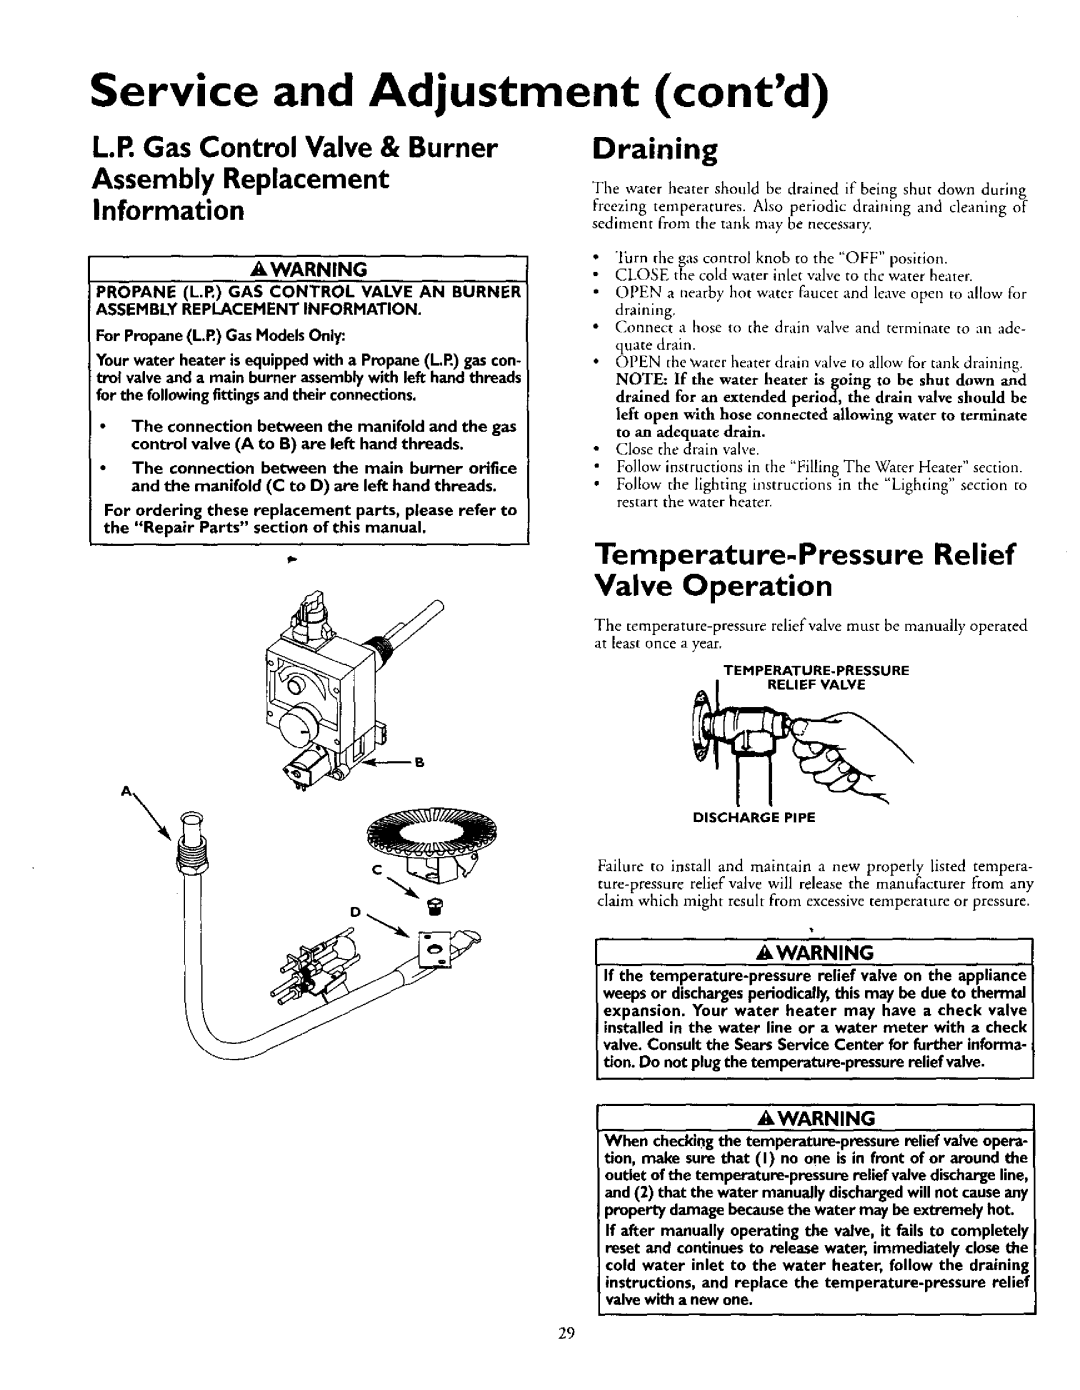 Kenmore 153.335846 Service and Adjustment contd, L.R Gas Control Valve & Burner, Assembly Replacement Information 